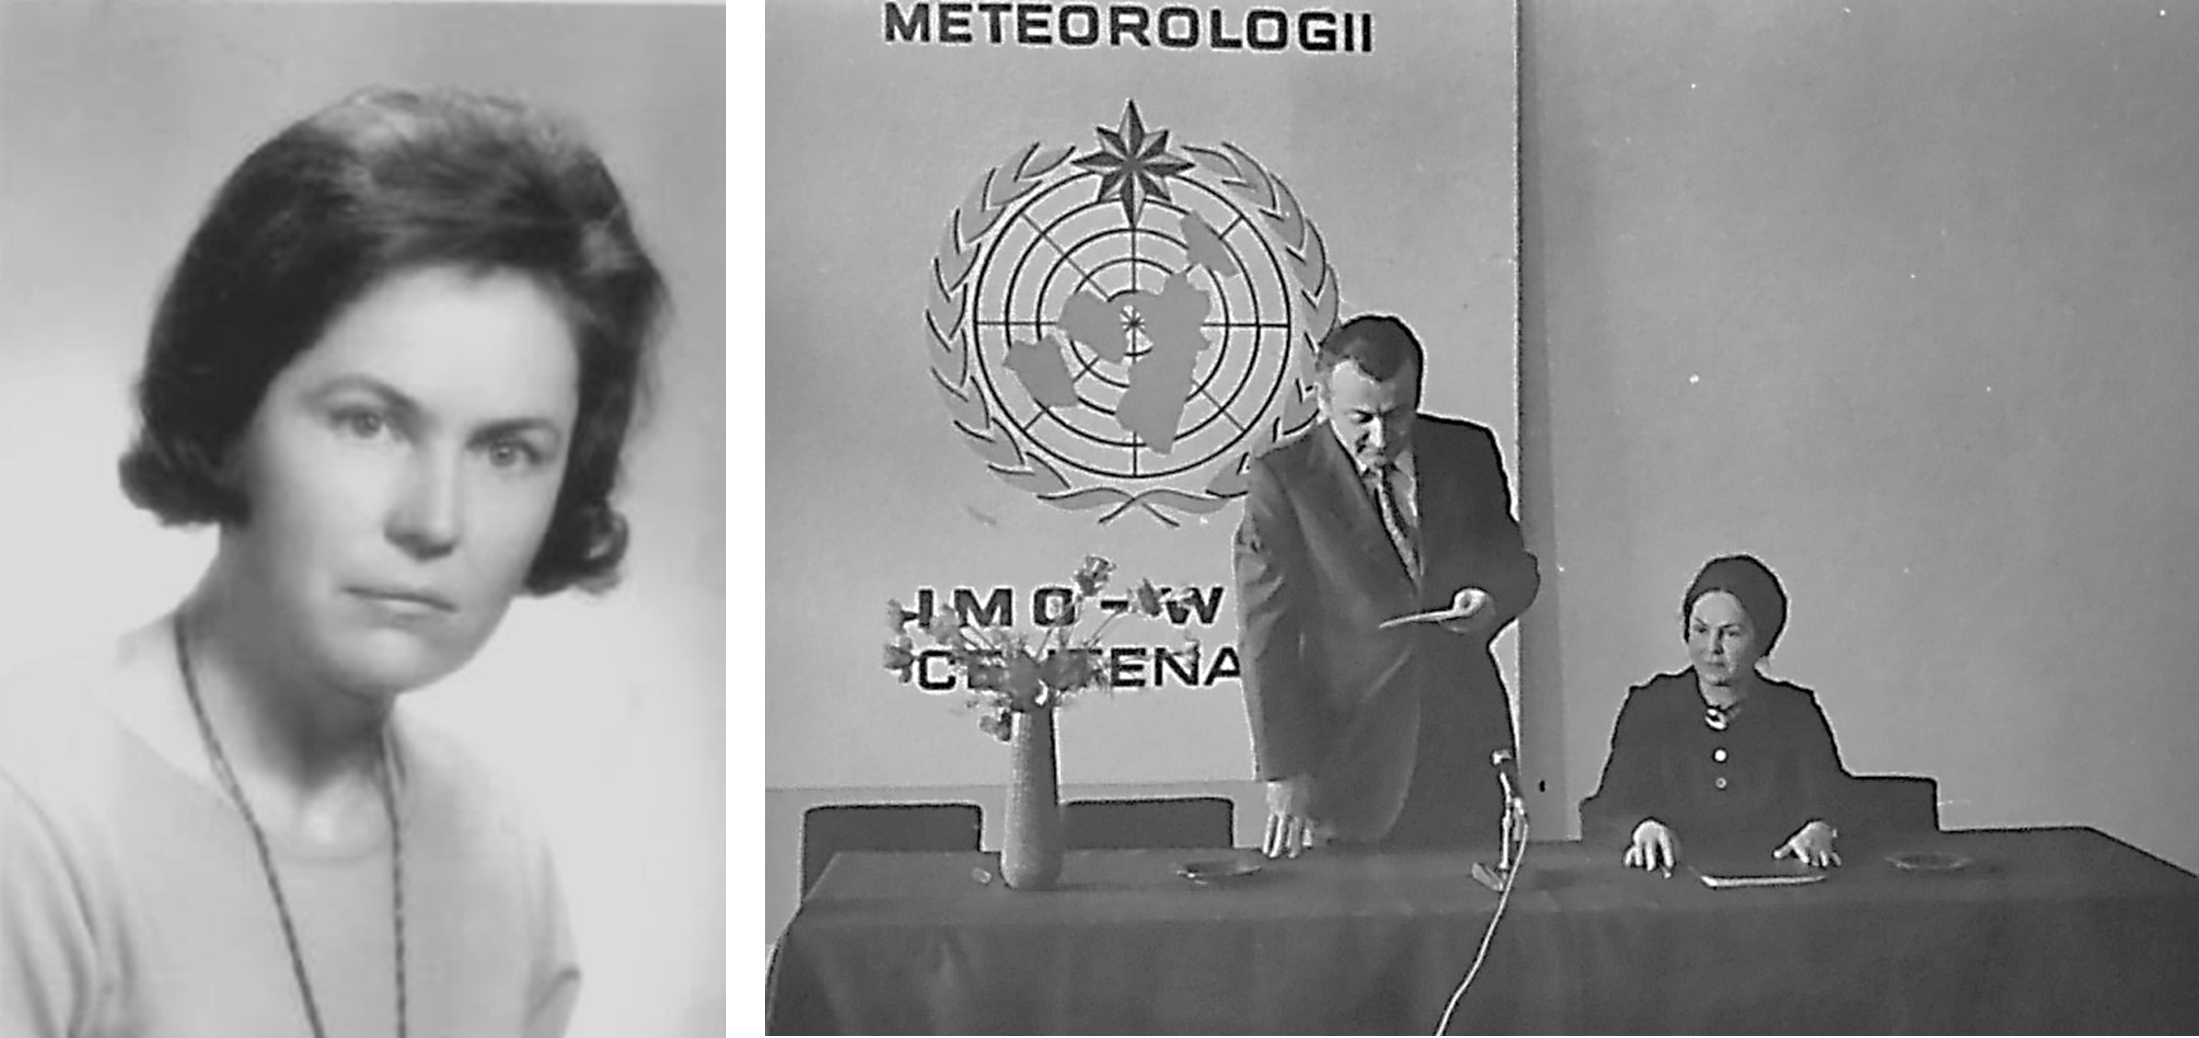 Docent Maria Baranowska (1925-2016). In the right photo, accompanied by Stefan Reichhart during the seminar "Meteorology in the service of tourism" on the occasion of the 16th World Meteorological Day, March 23, 1974.